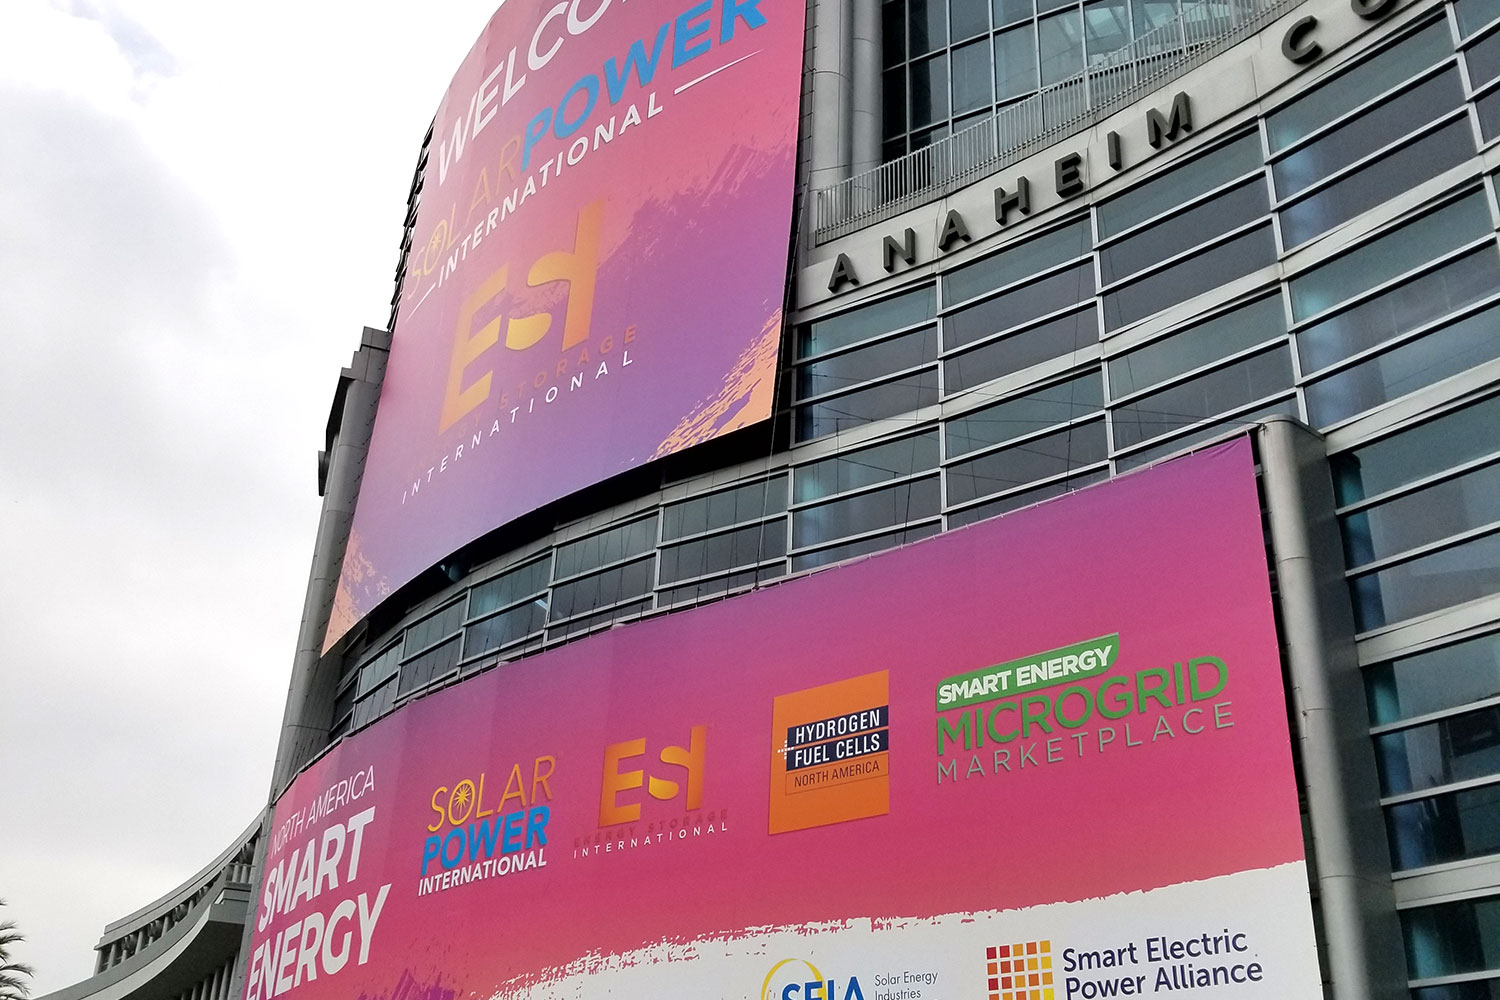 Getting Solar Power Energized at SPI 2018